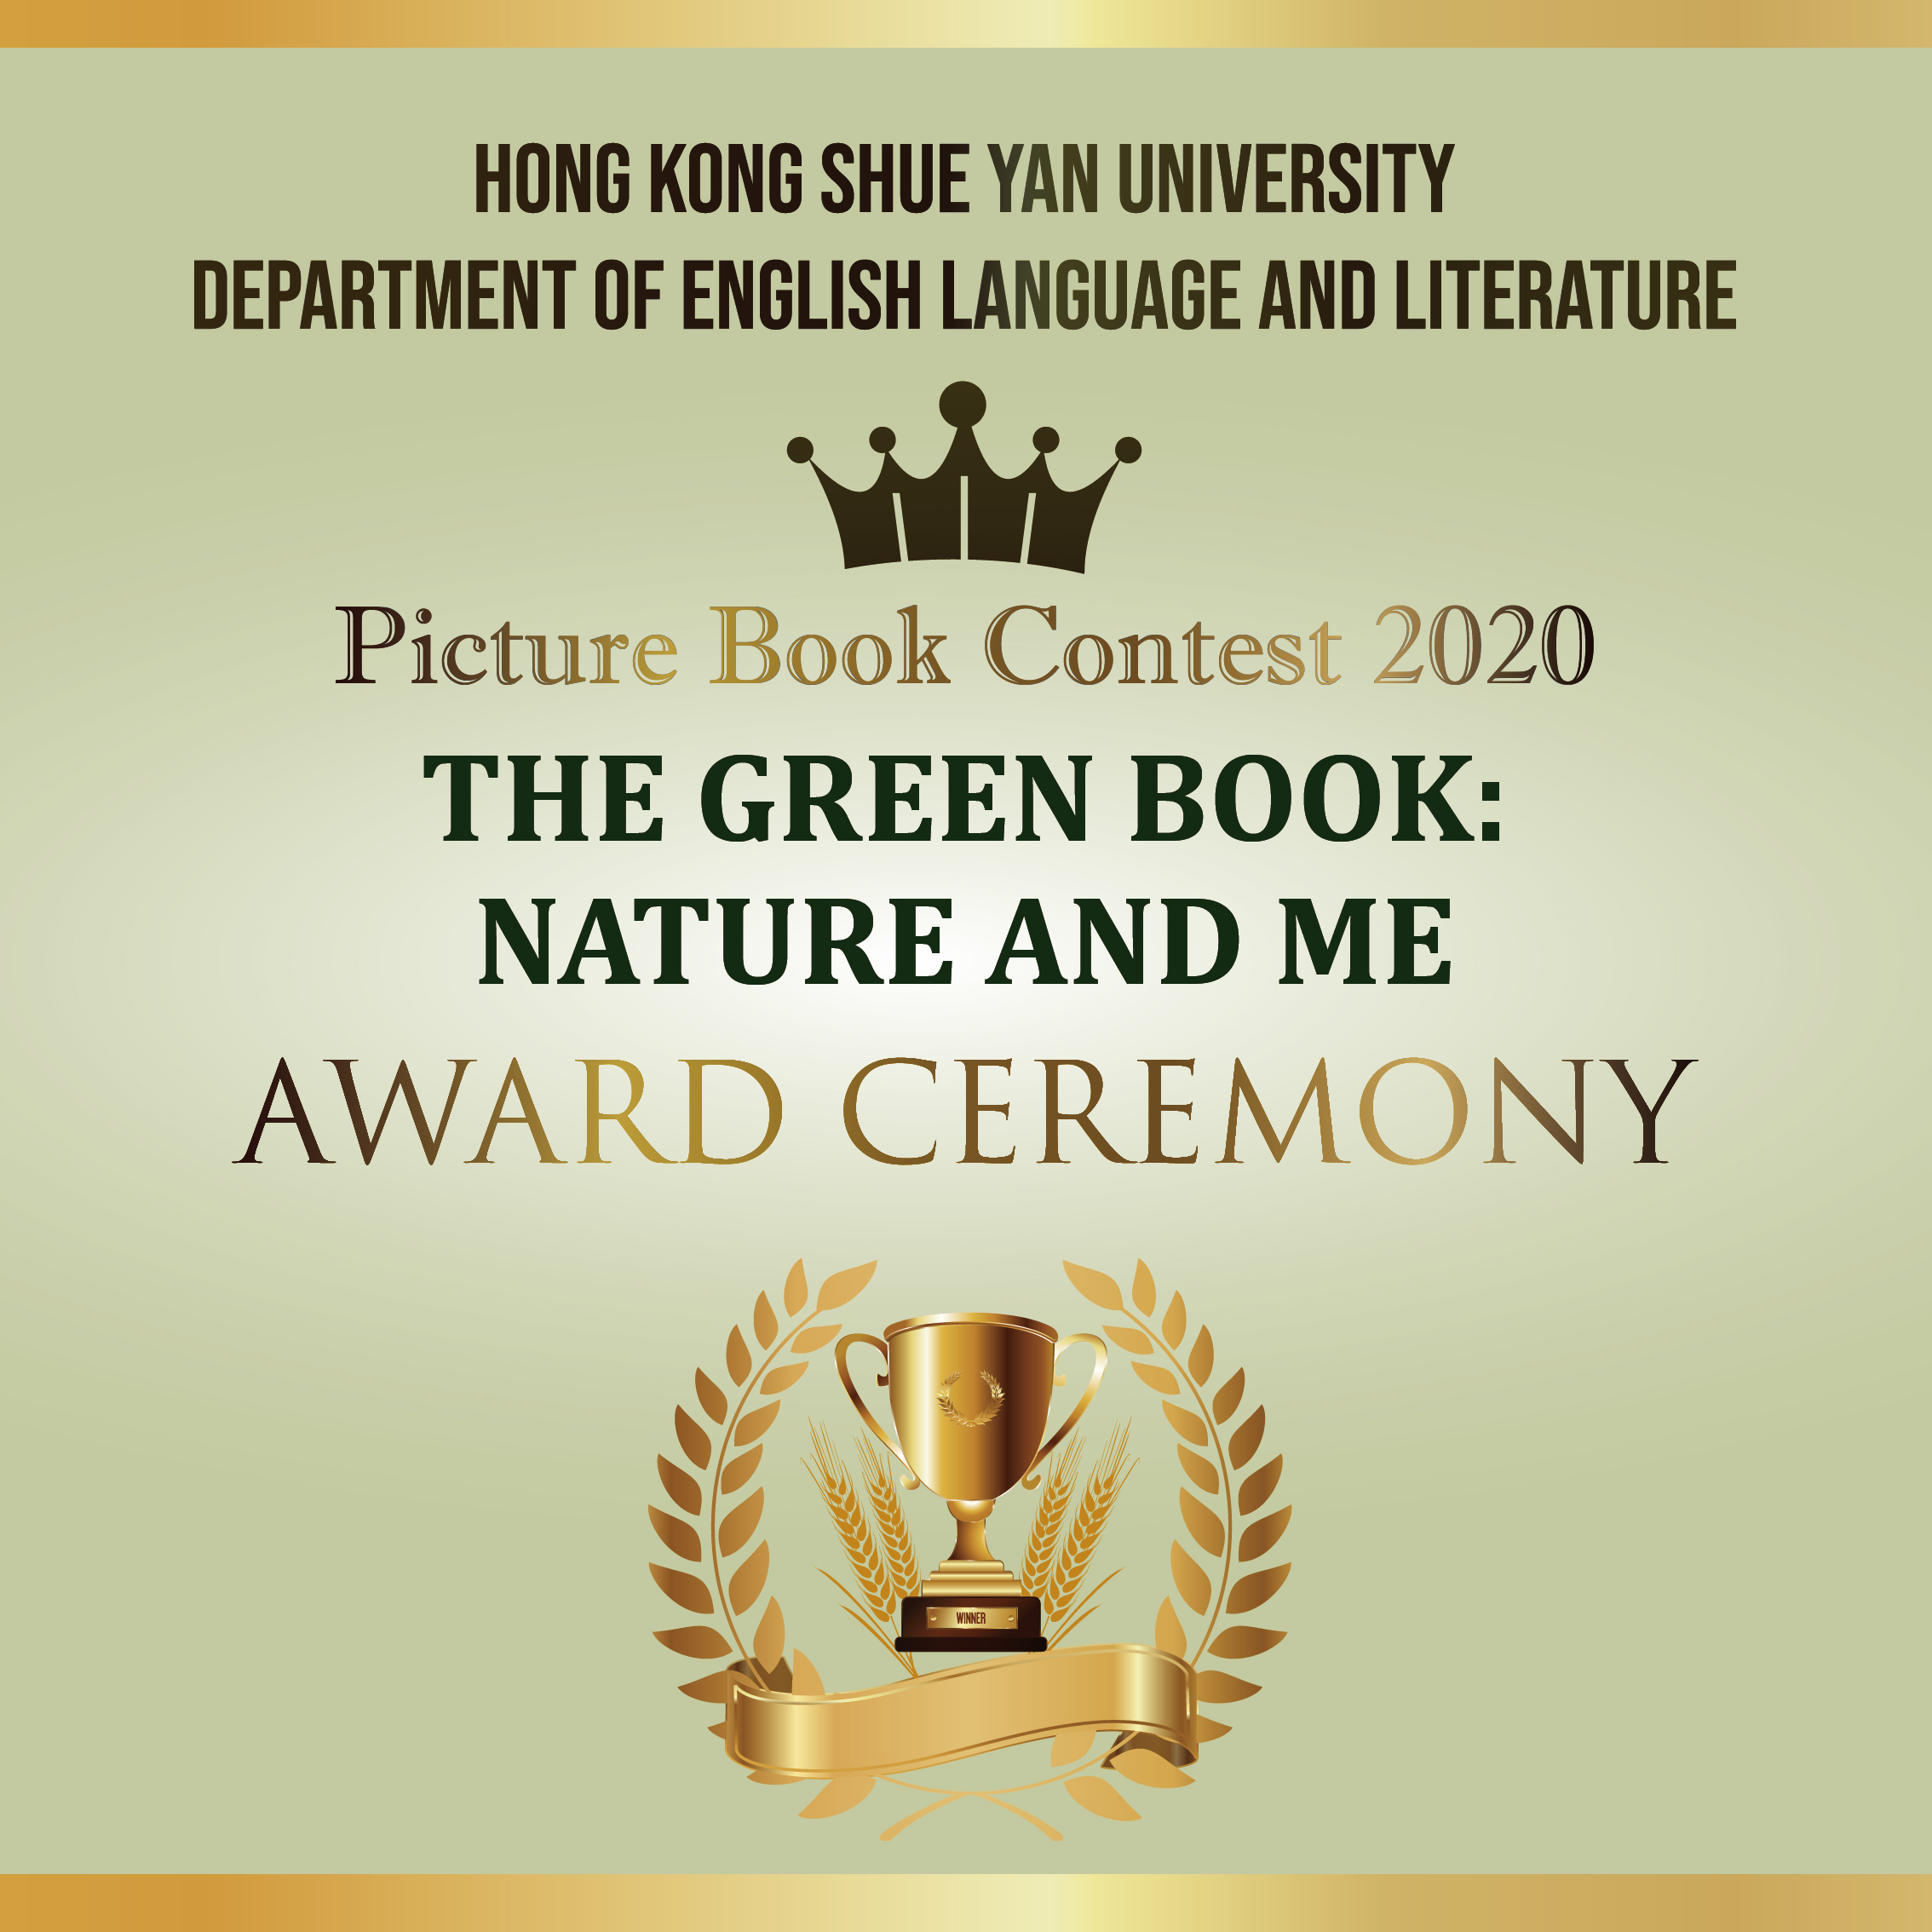 The Award Ceremony of the Picture Book Contest 2020 - “The Green Book: Nature and Me”